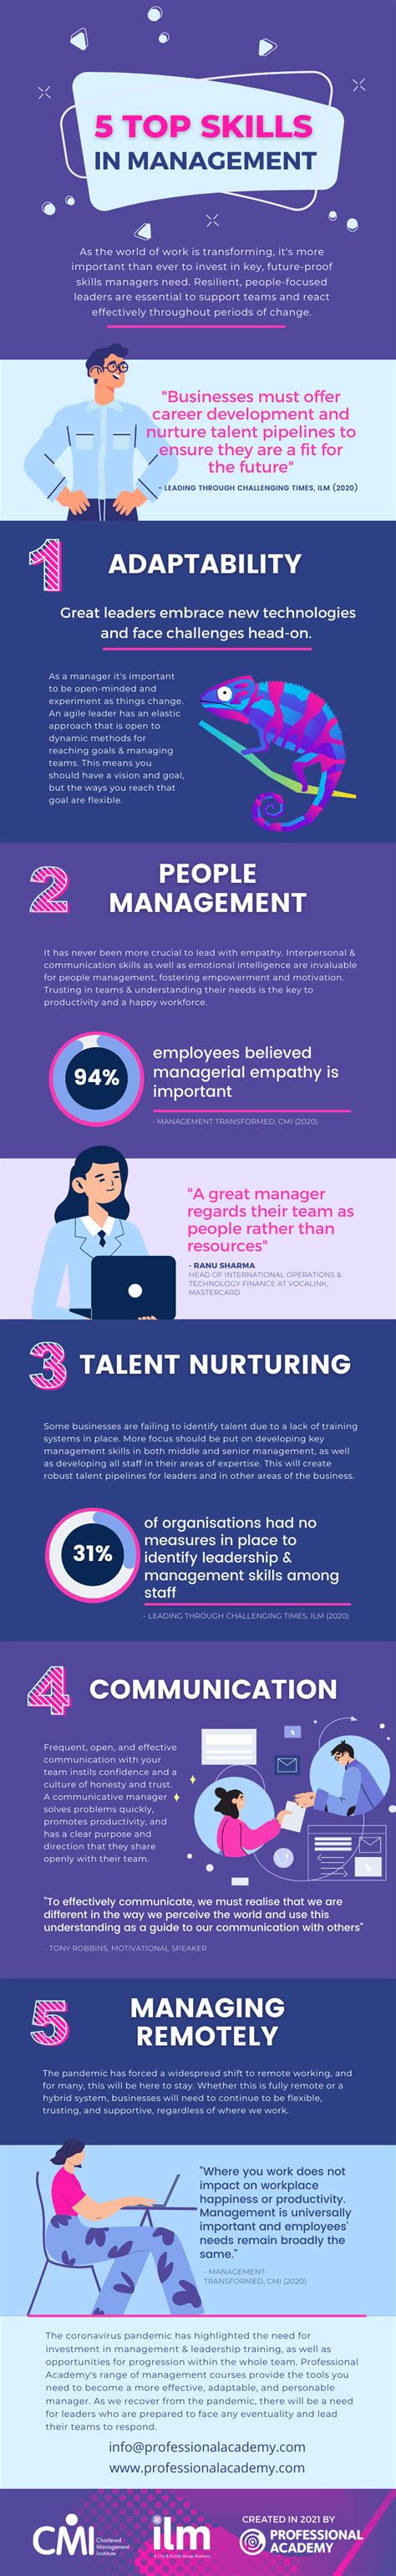 Five Essential Skills For A Successful Management Career